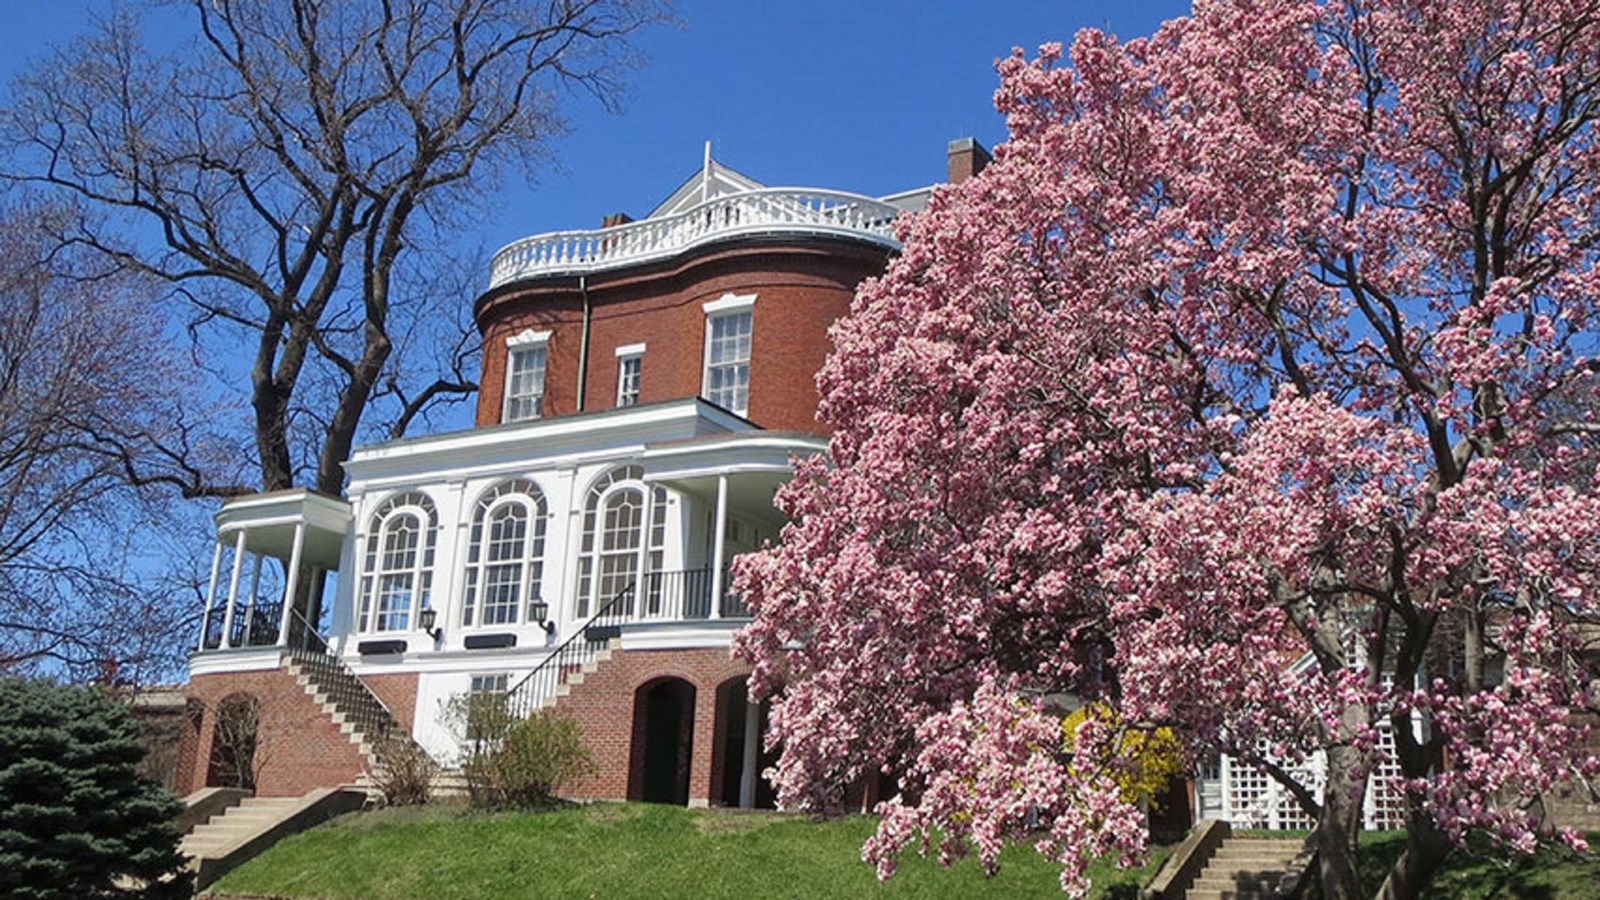 Commandant House, a red brick and white wood Federalist Style structure next to a blooming tree.